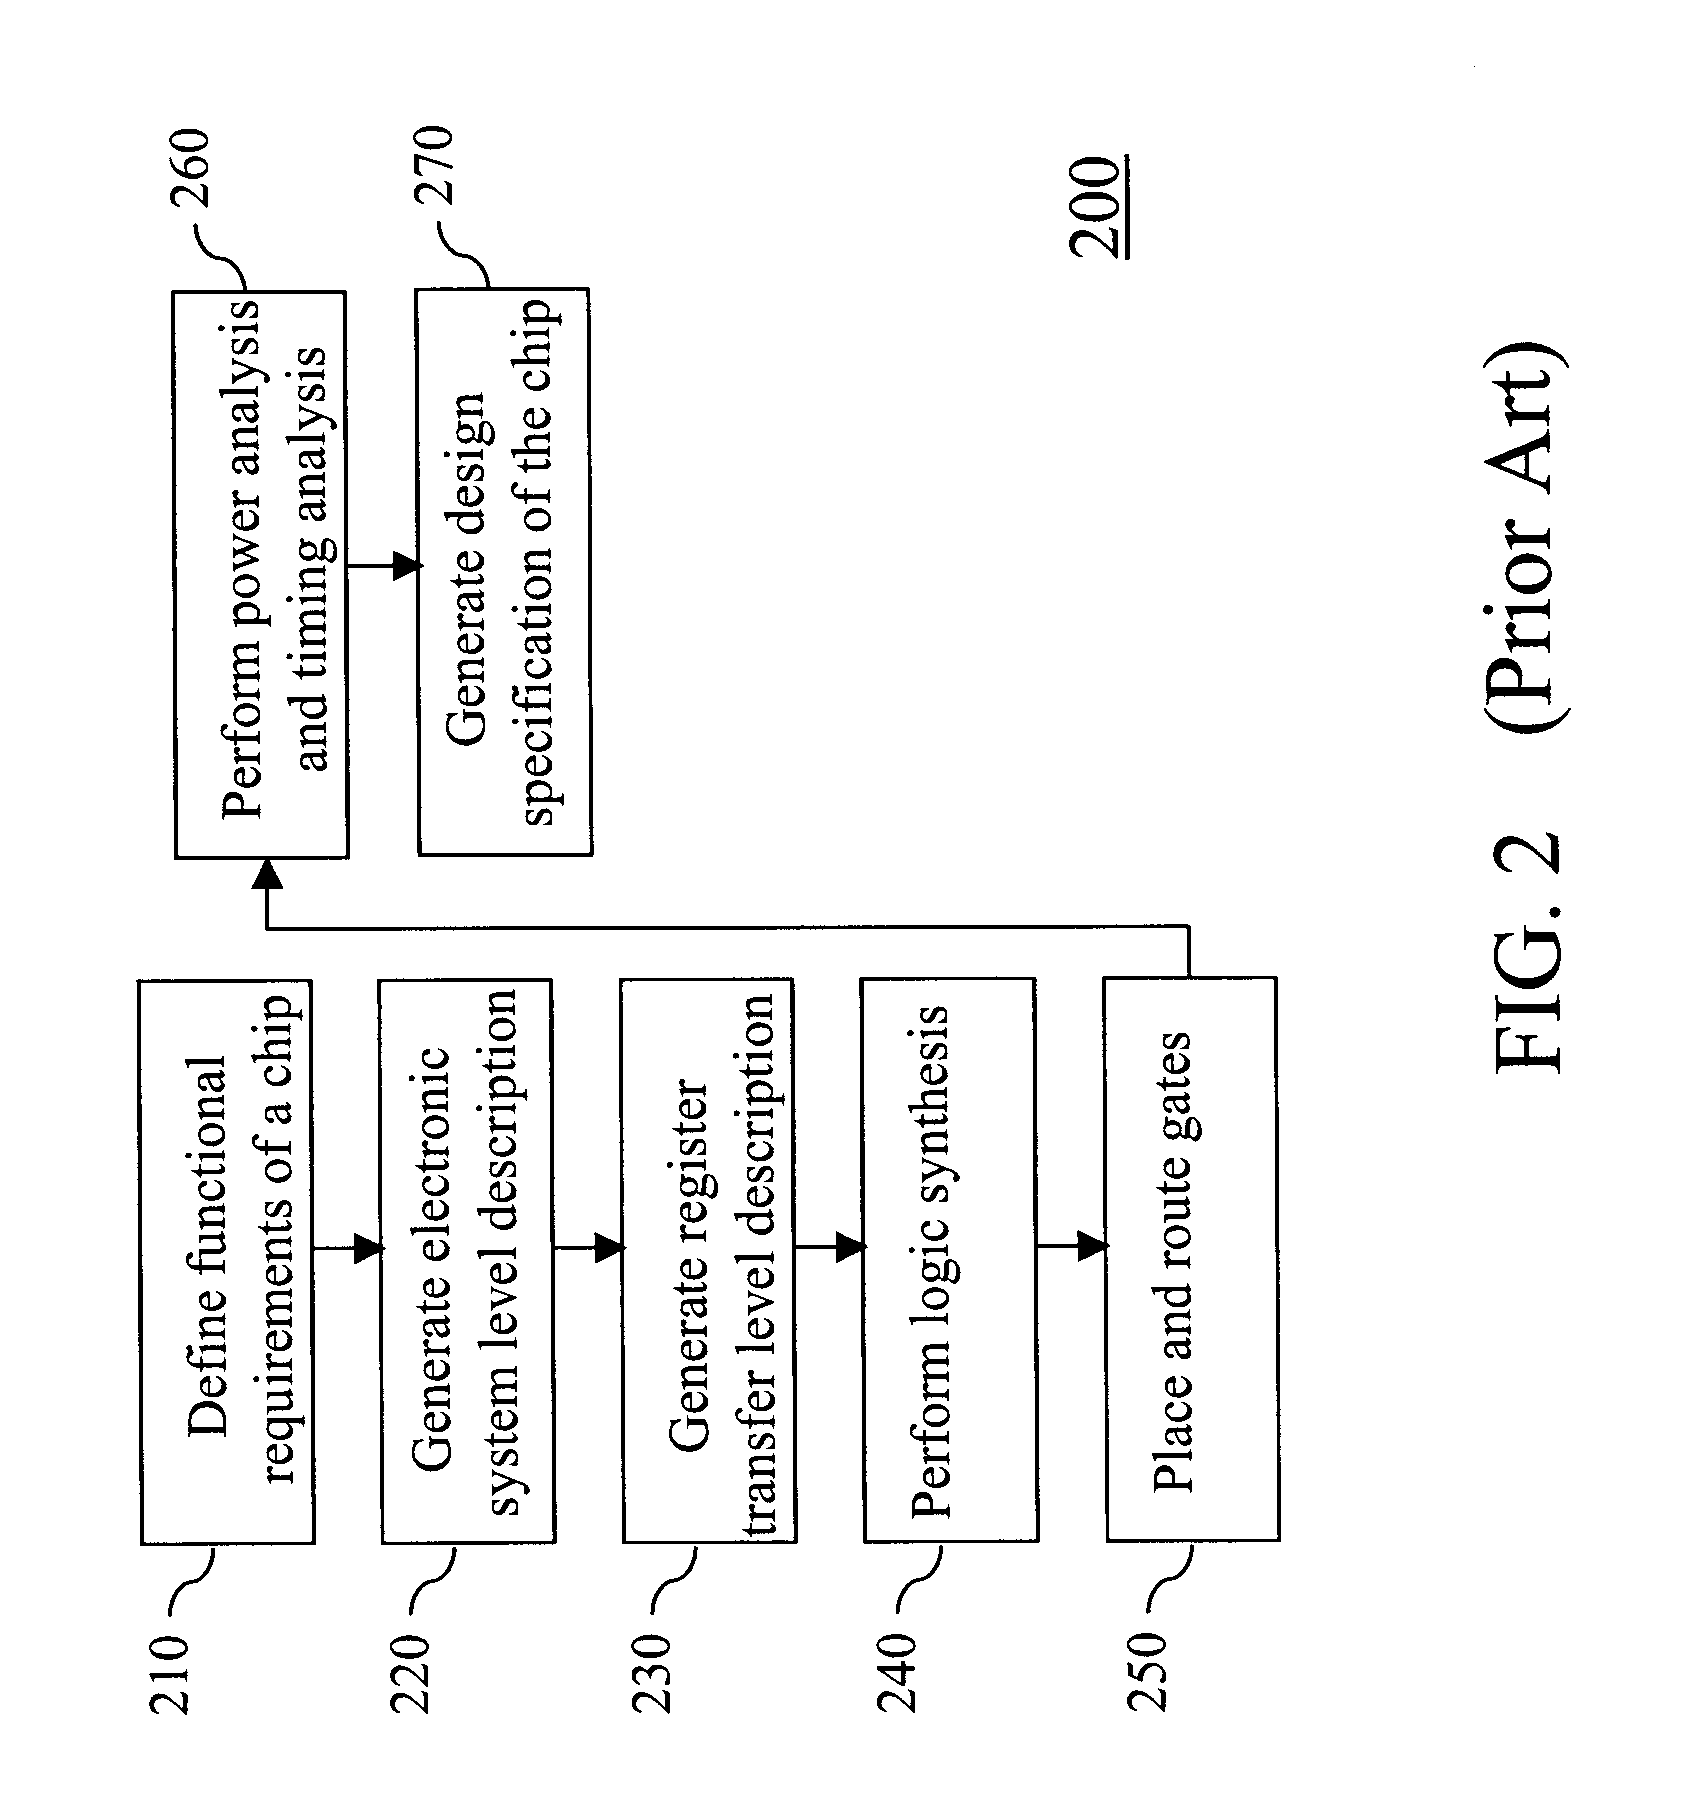 Methods and system for analysis and management of parametric yield